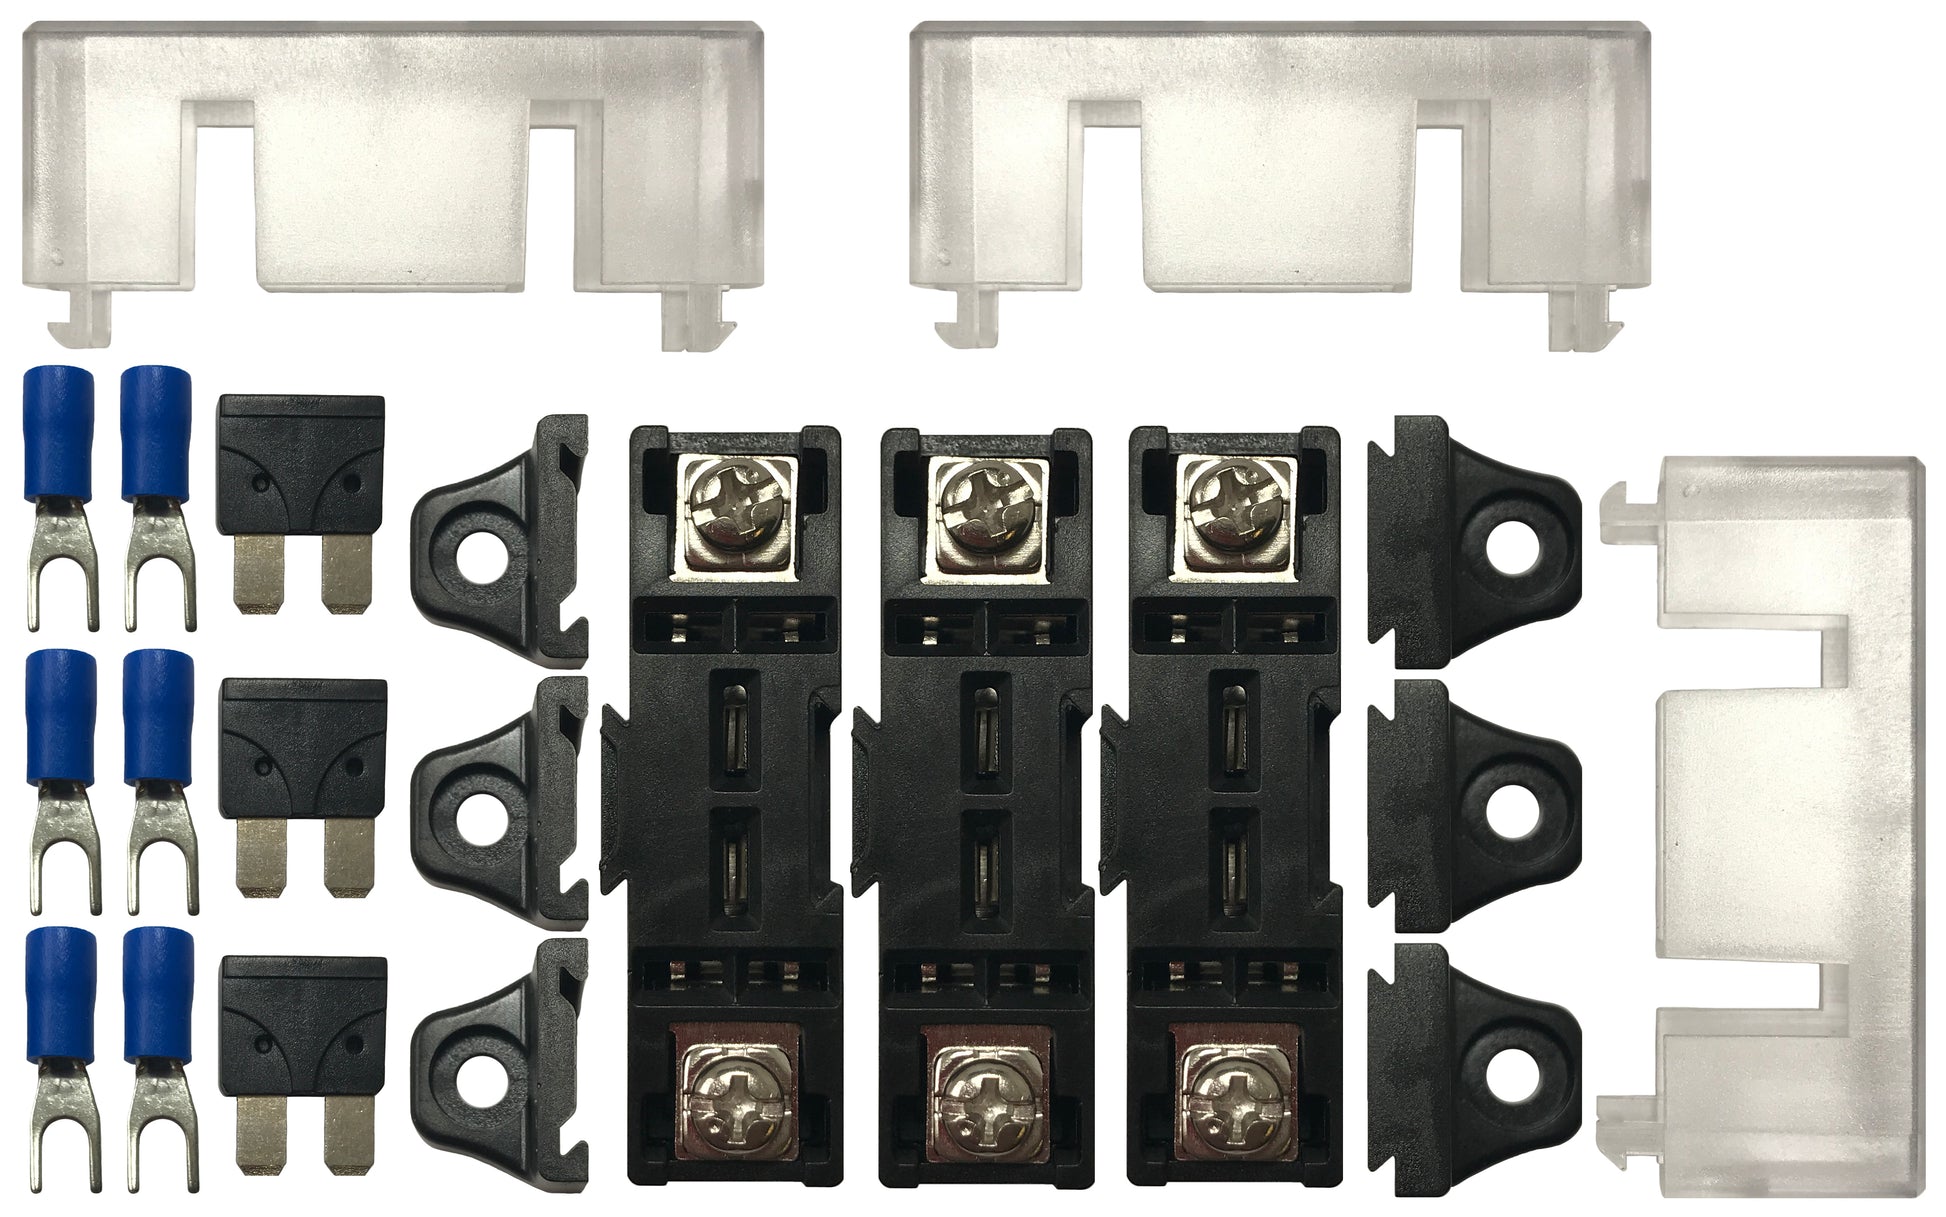 Stack-able ATO/ATC & ATM/MIN Fuse Panel Distribution Block - 3 Pack